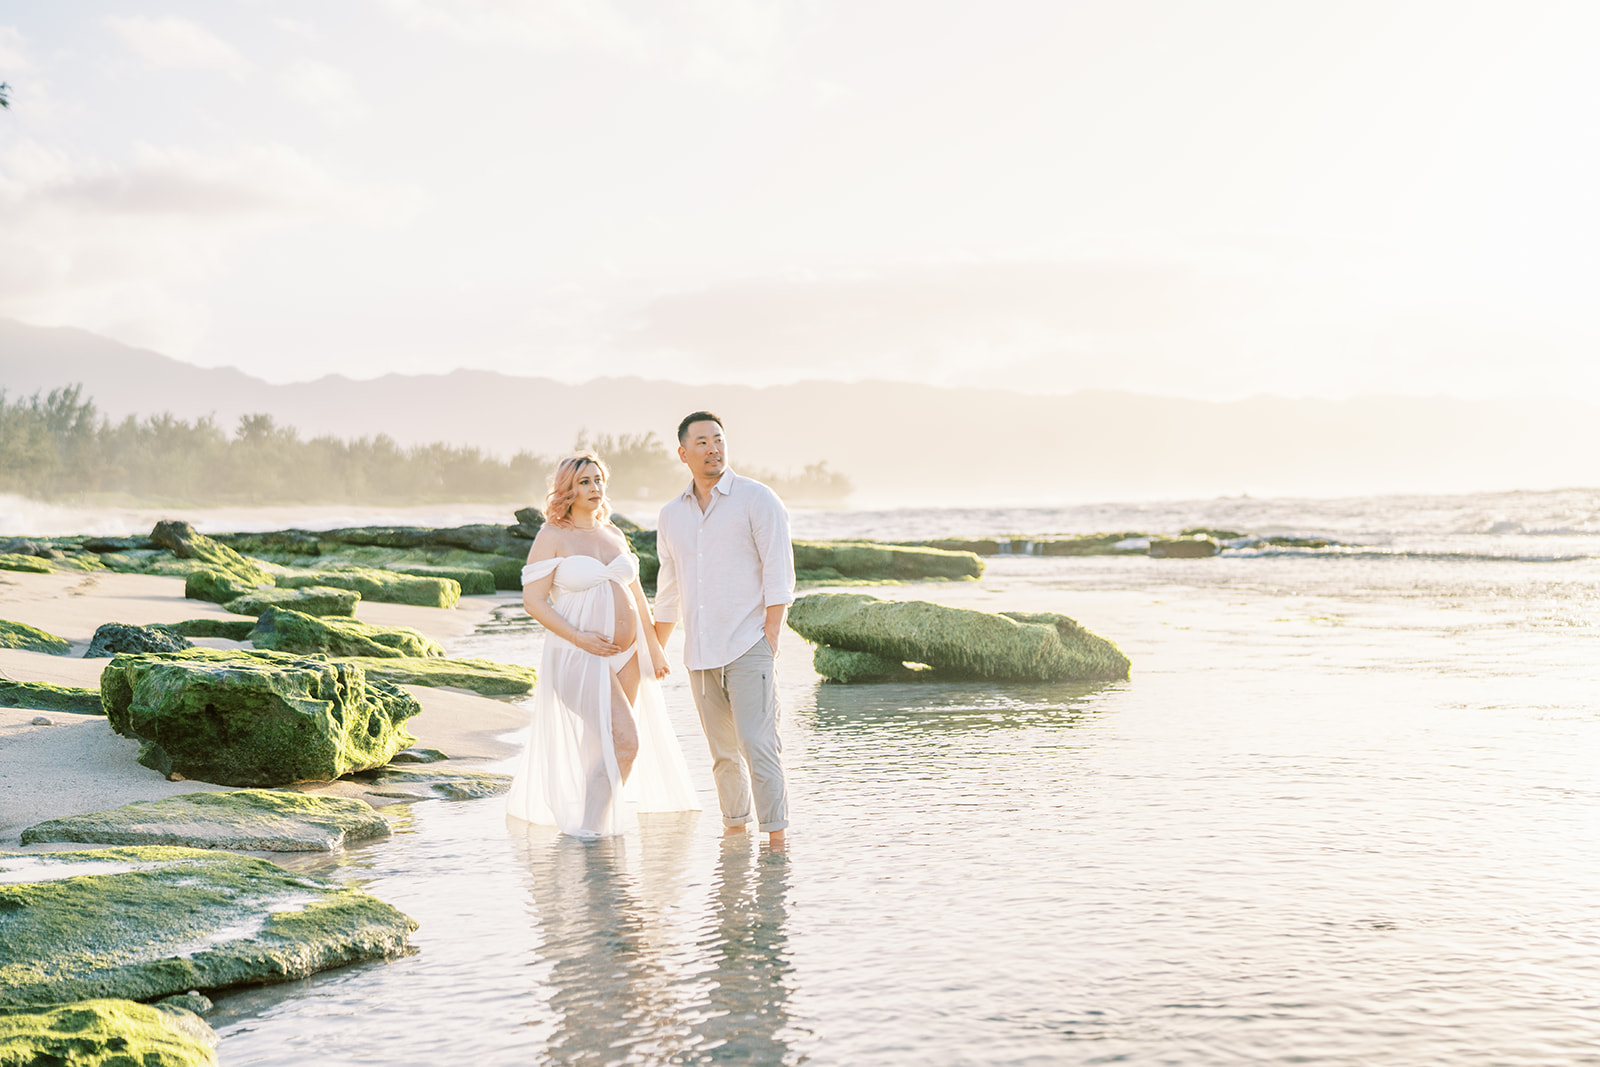 Couple wearing white clothing holding hands on a beach at sunset on Oahu Maternity Session.